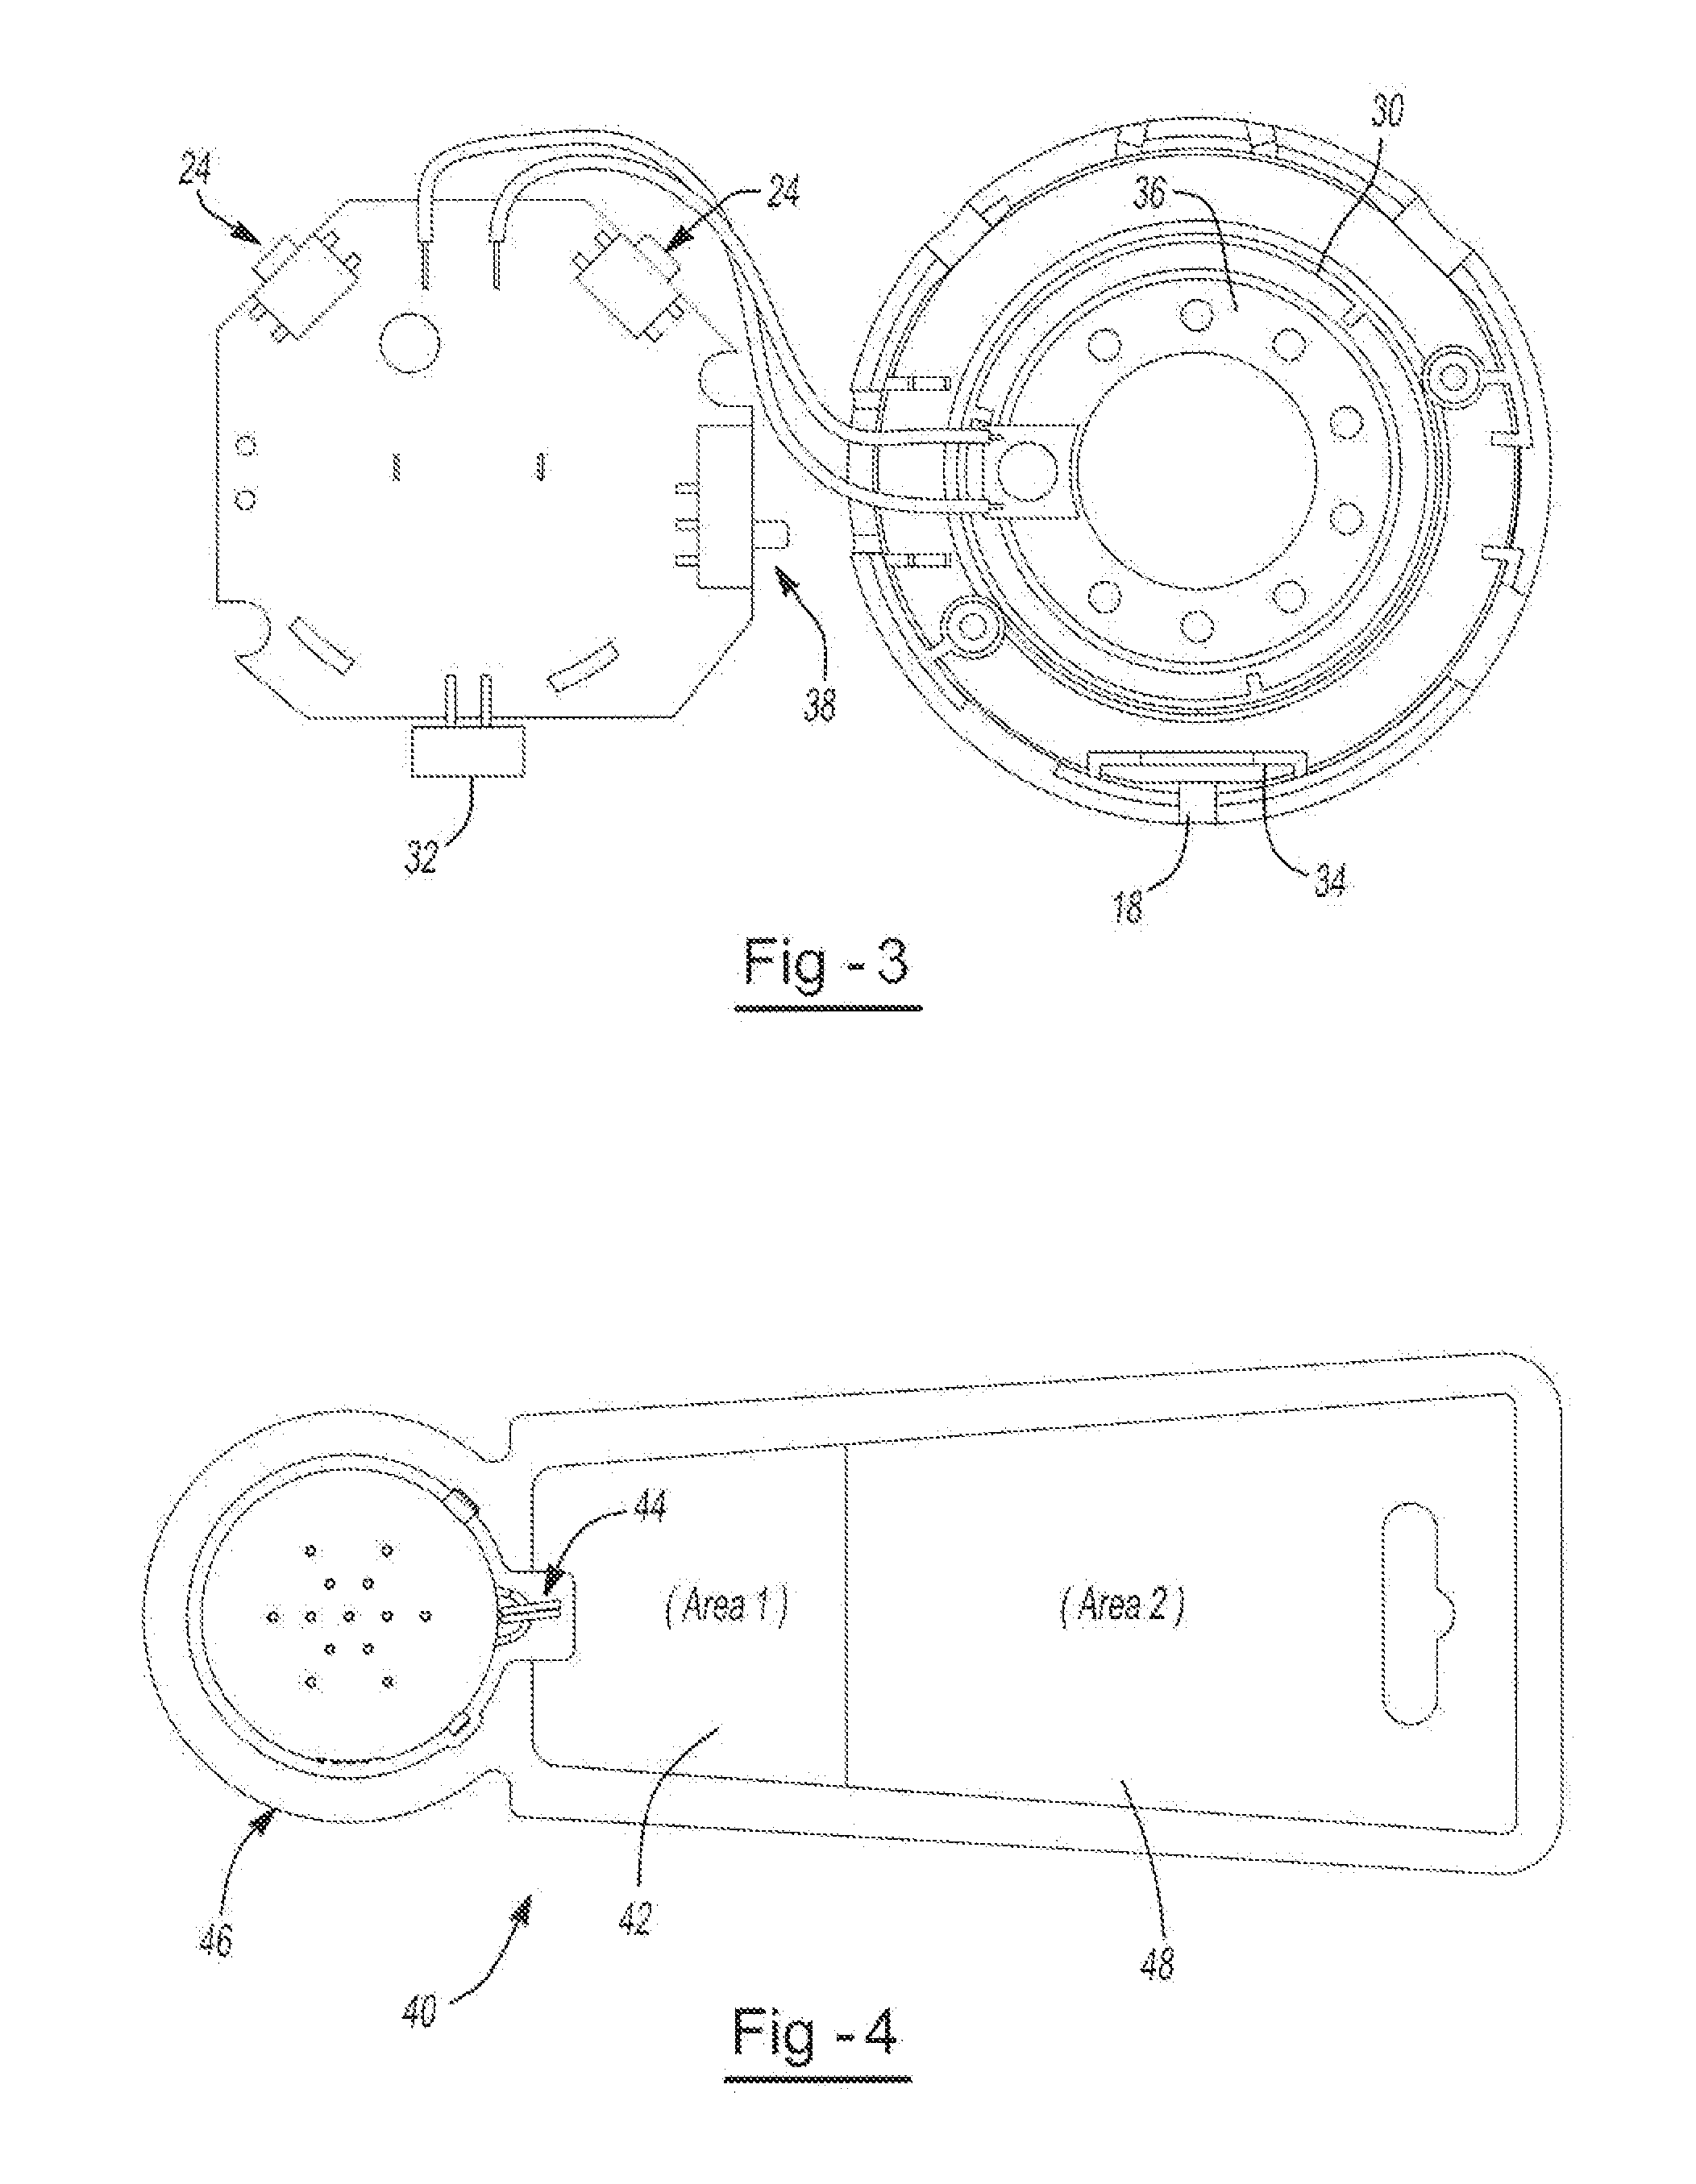 Sound recordable/playable device, packaging, and method of use